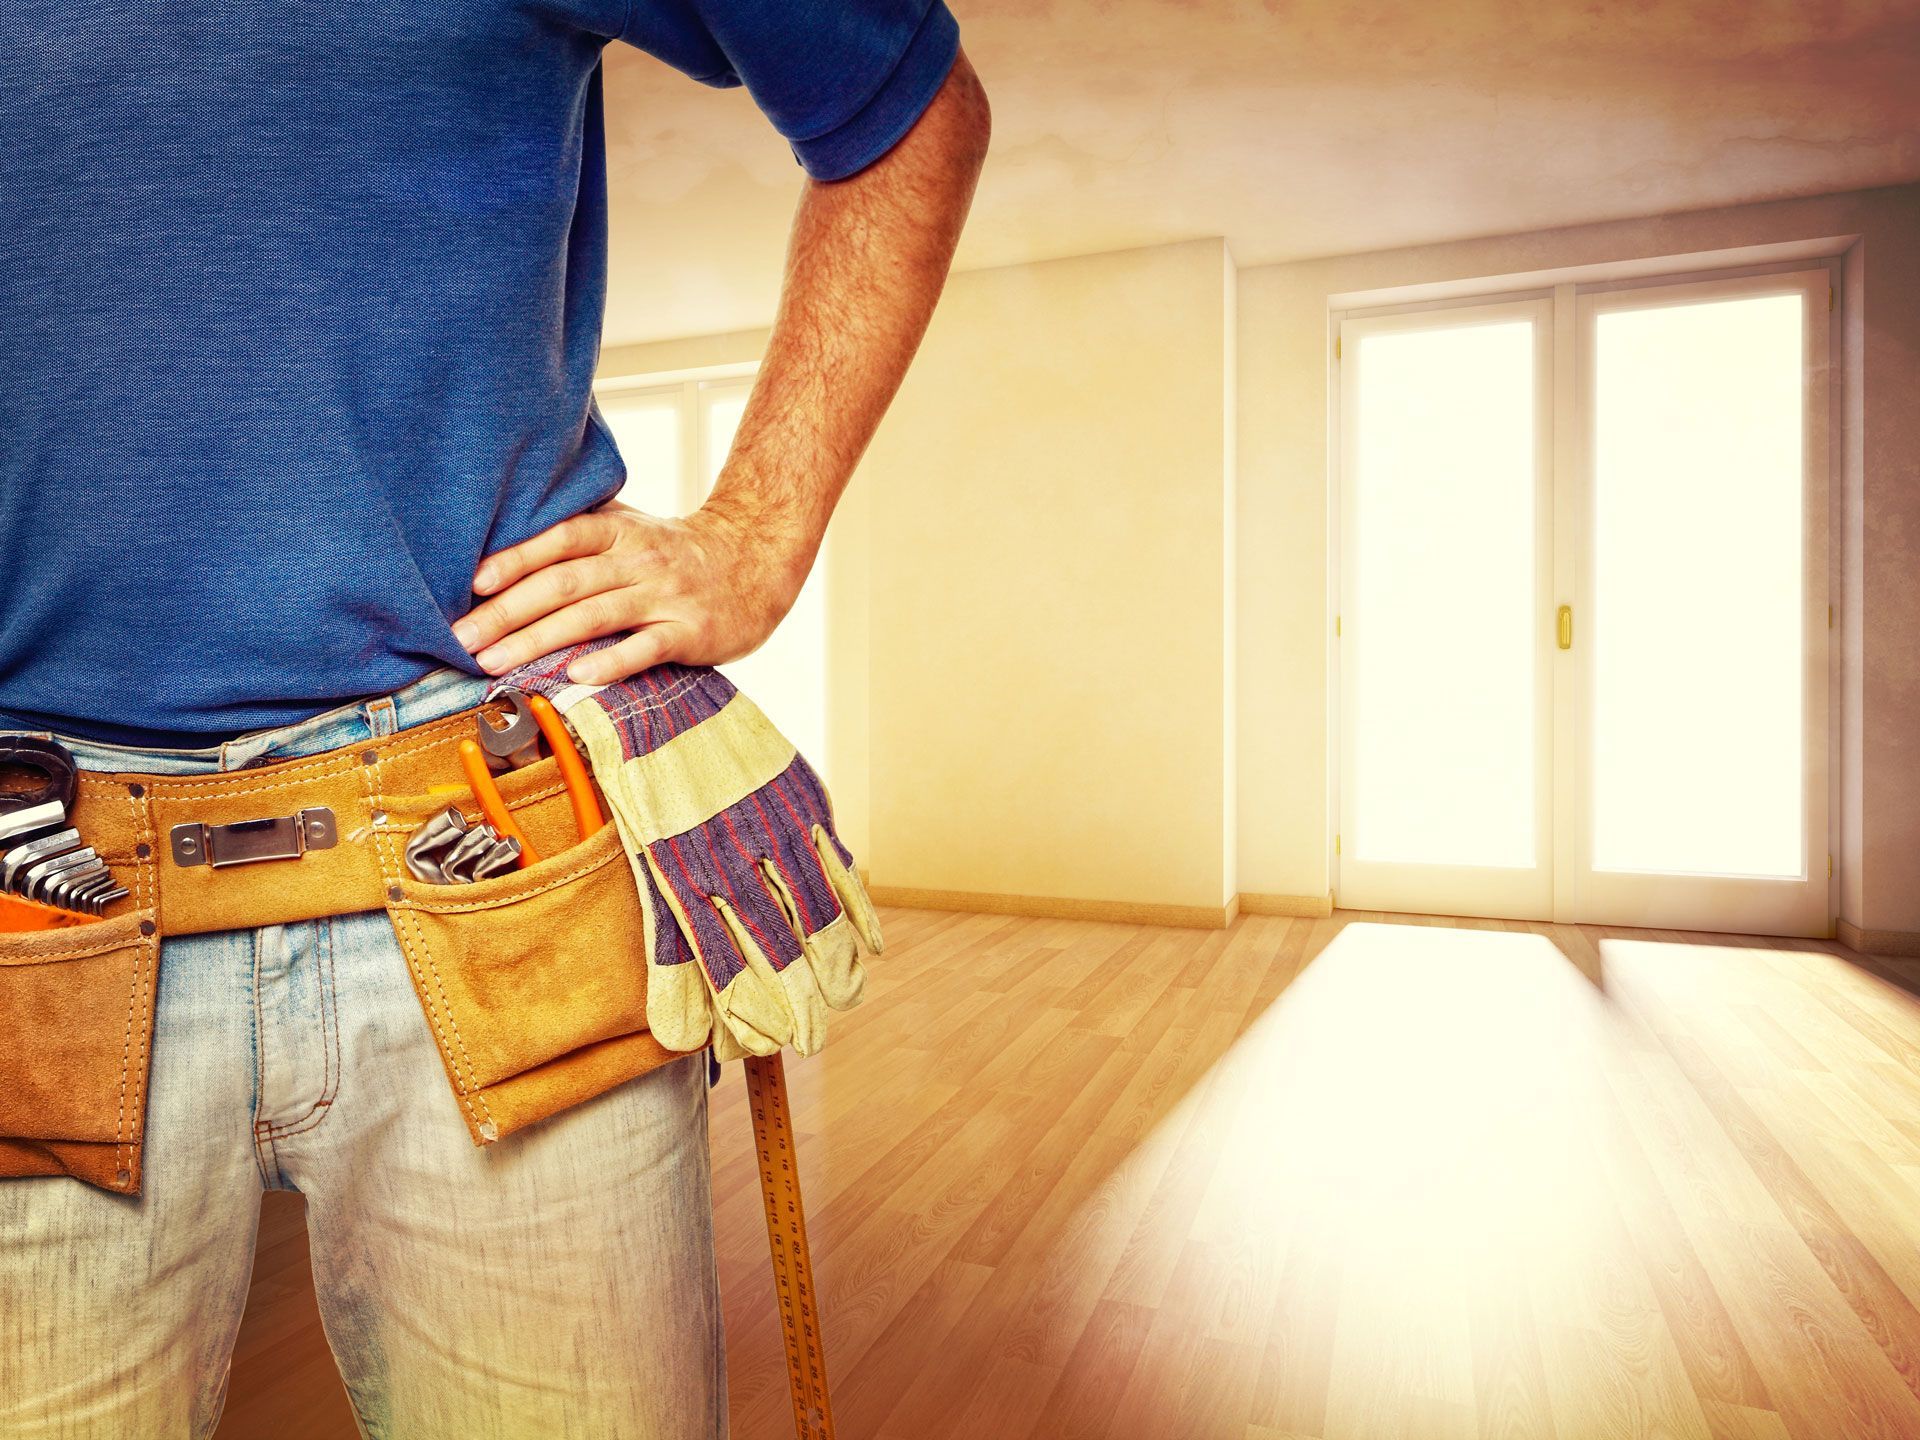 A man wearing a tool belt and gloves is standing in an empty room .